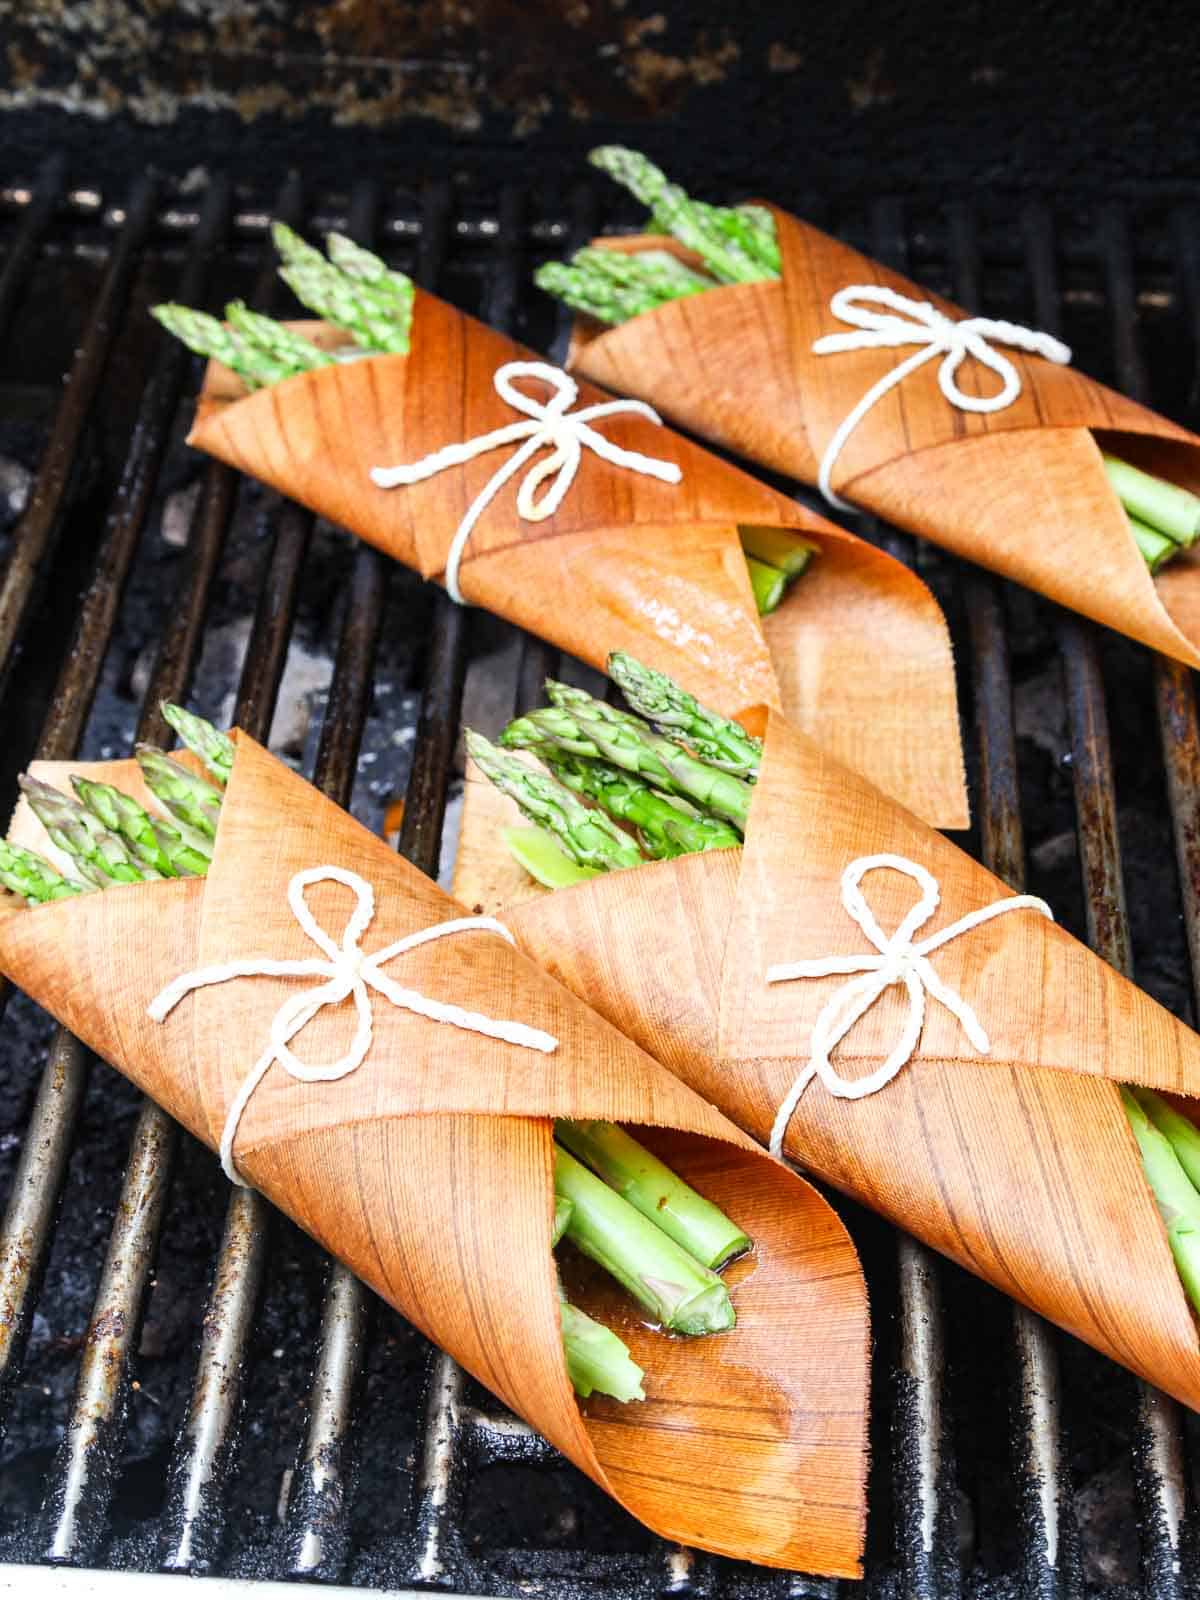 Cedar wrapped bundles of salmon and asparagus on the gas grill tied with kitchen string.